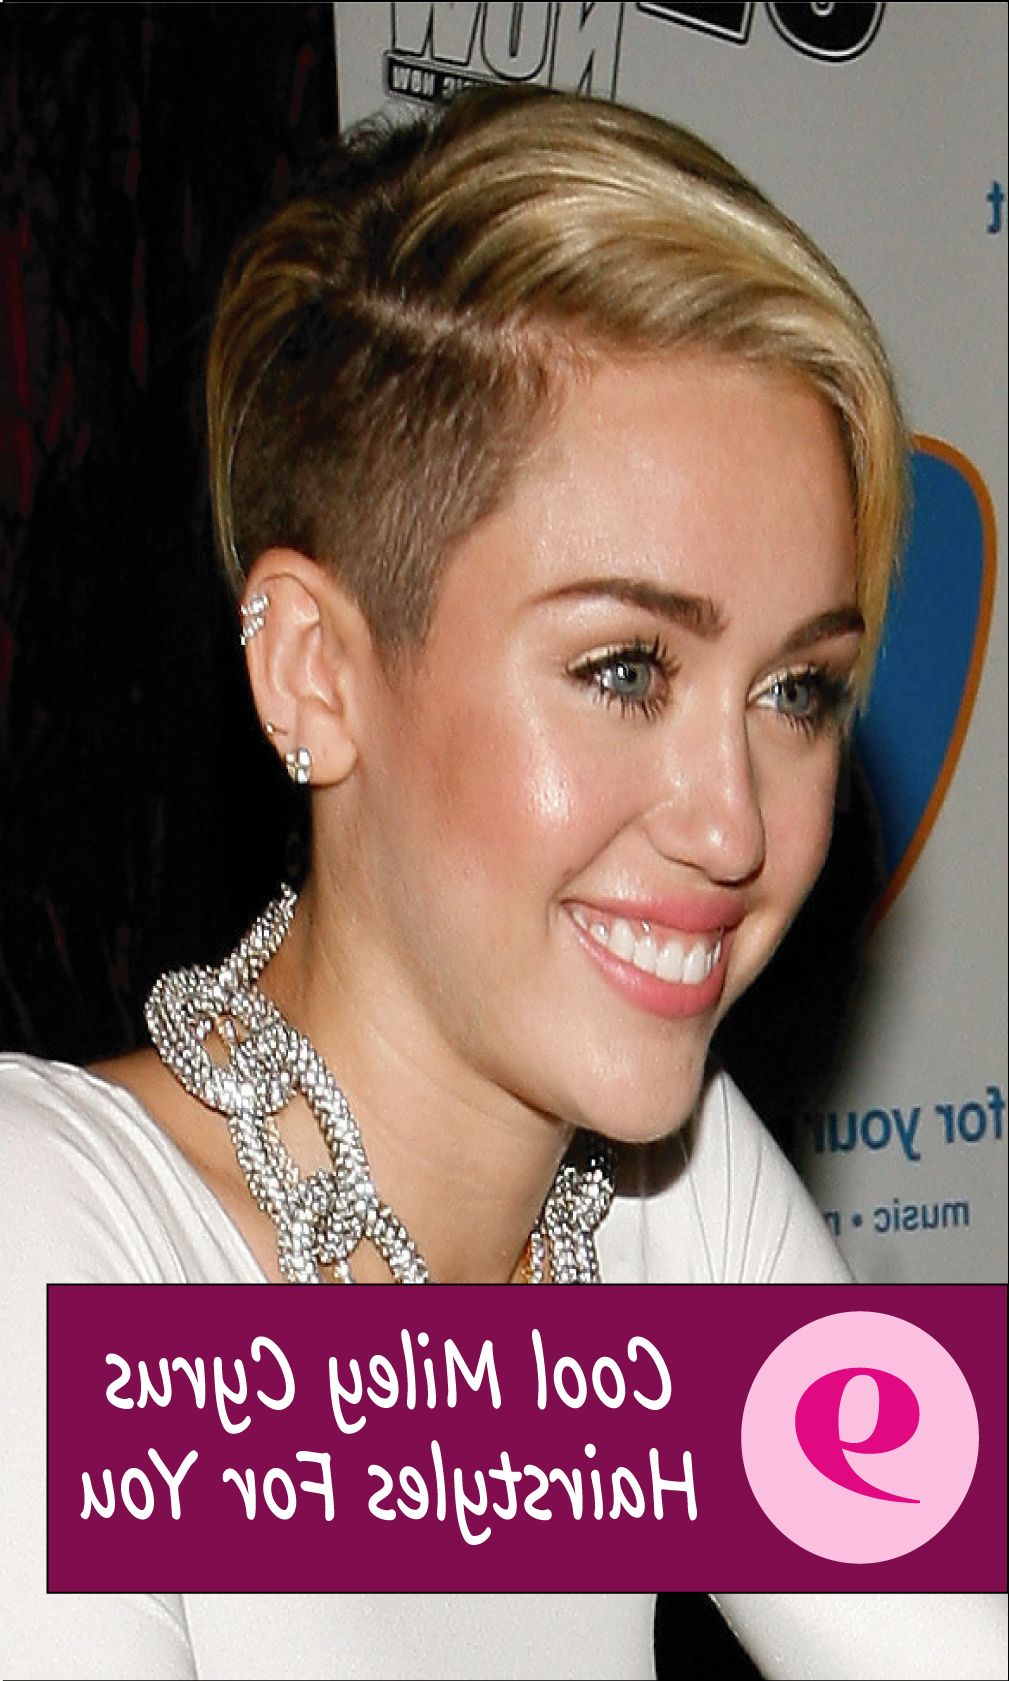 9 Cool Miley Cyrus Hairstyles For You! | Short Hairstyles With Miley Cyrus Short Hairstyles (View 21 of 25)